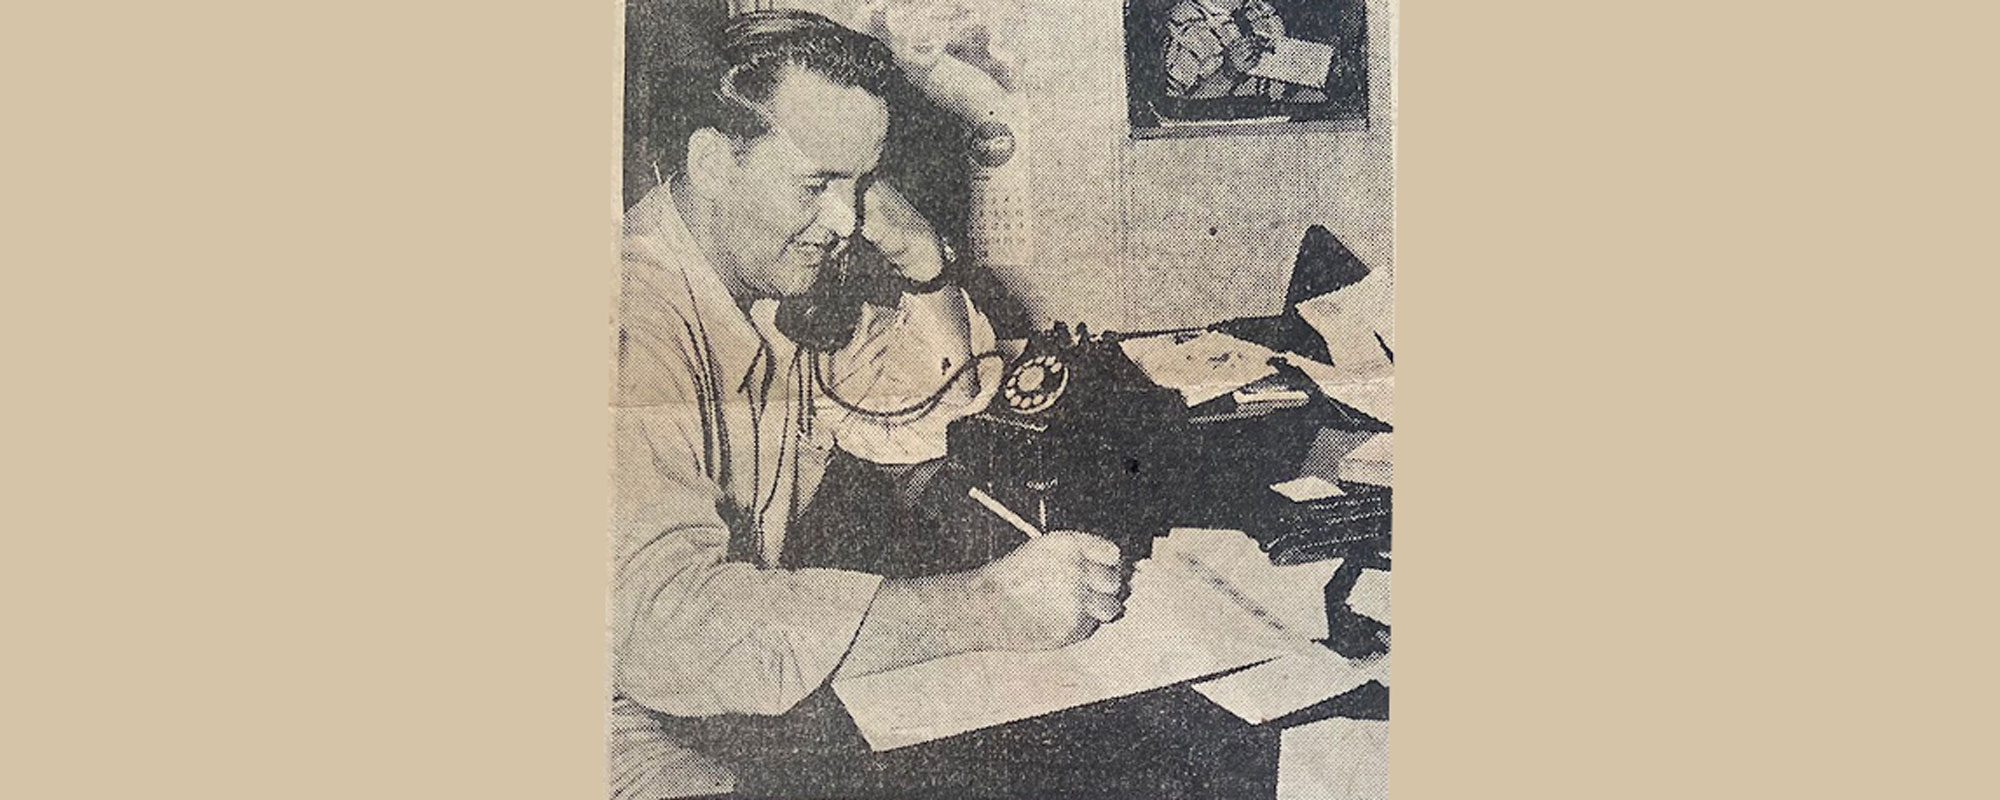 Leonard Brown Back In The Day Talking On The Dial Phone And Taking Notes On A Notepad